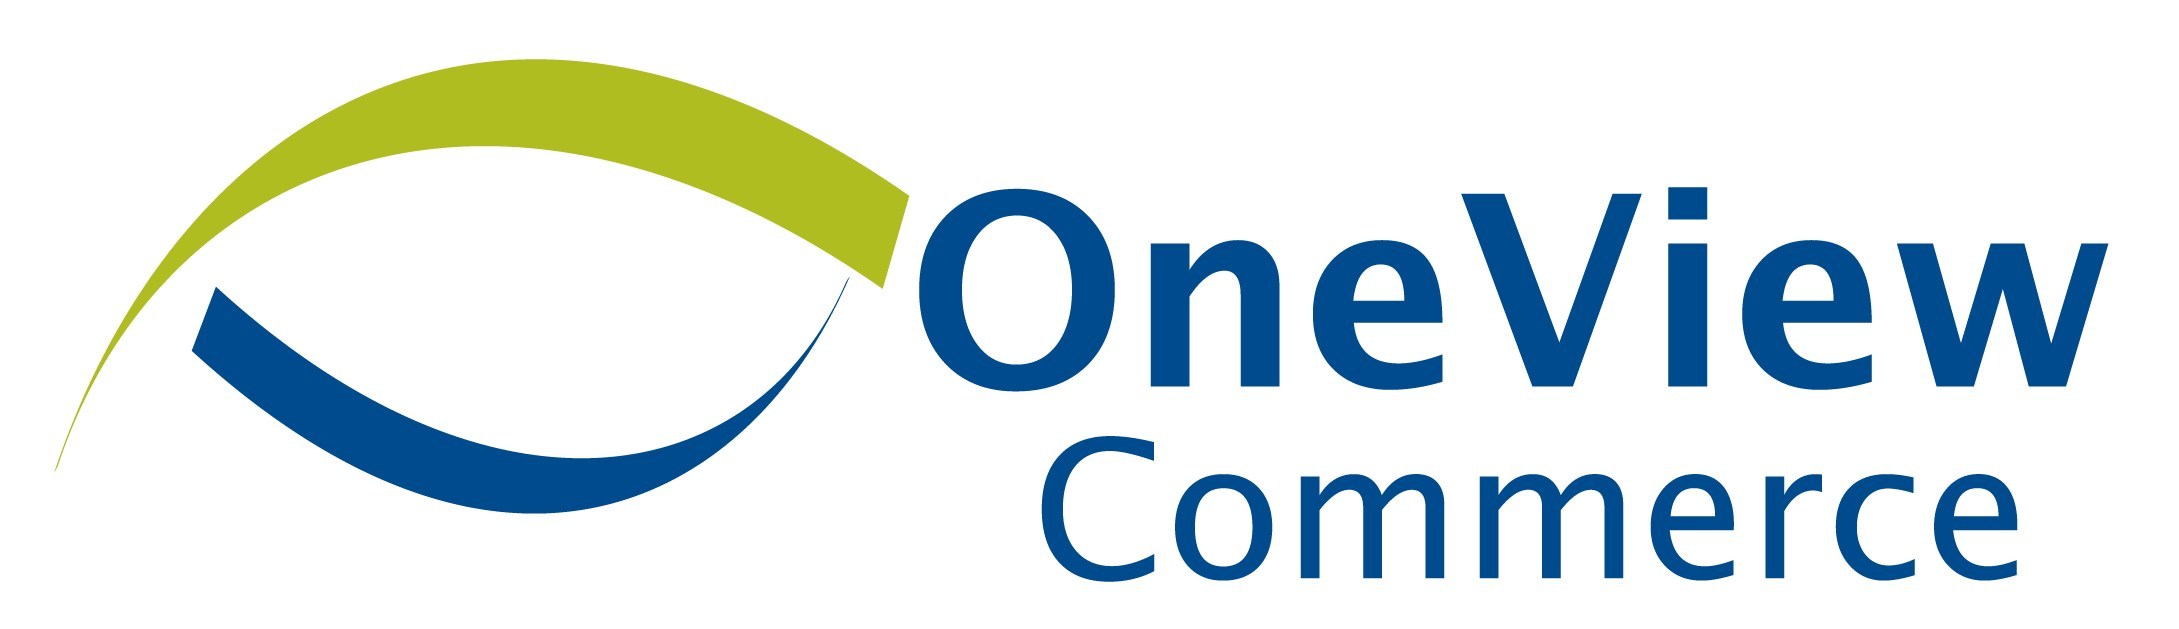 OneView Commerce Announces Pilot with Kroger